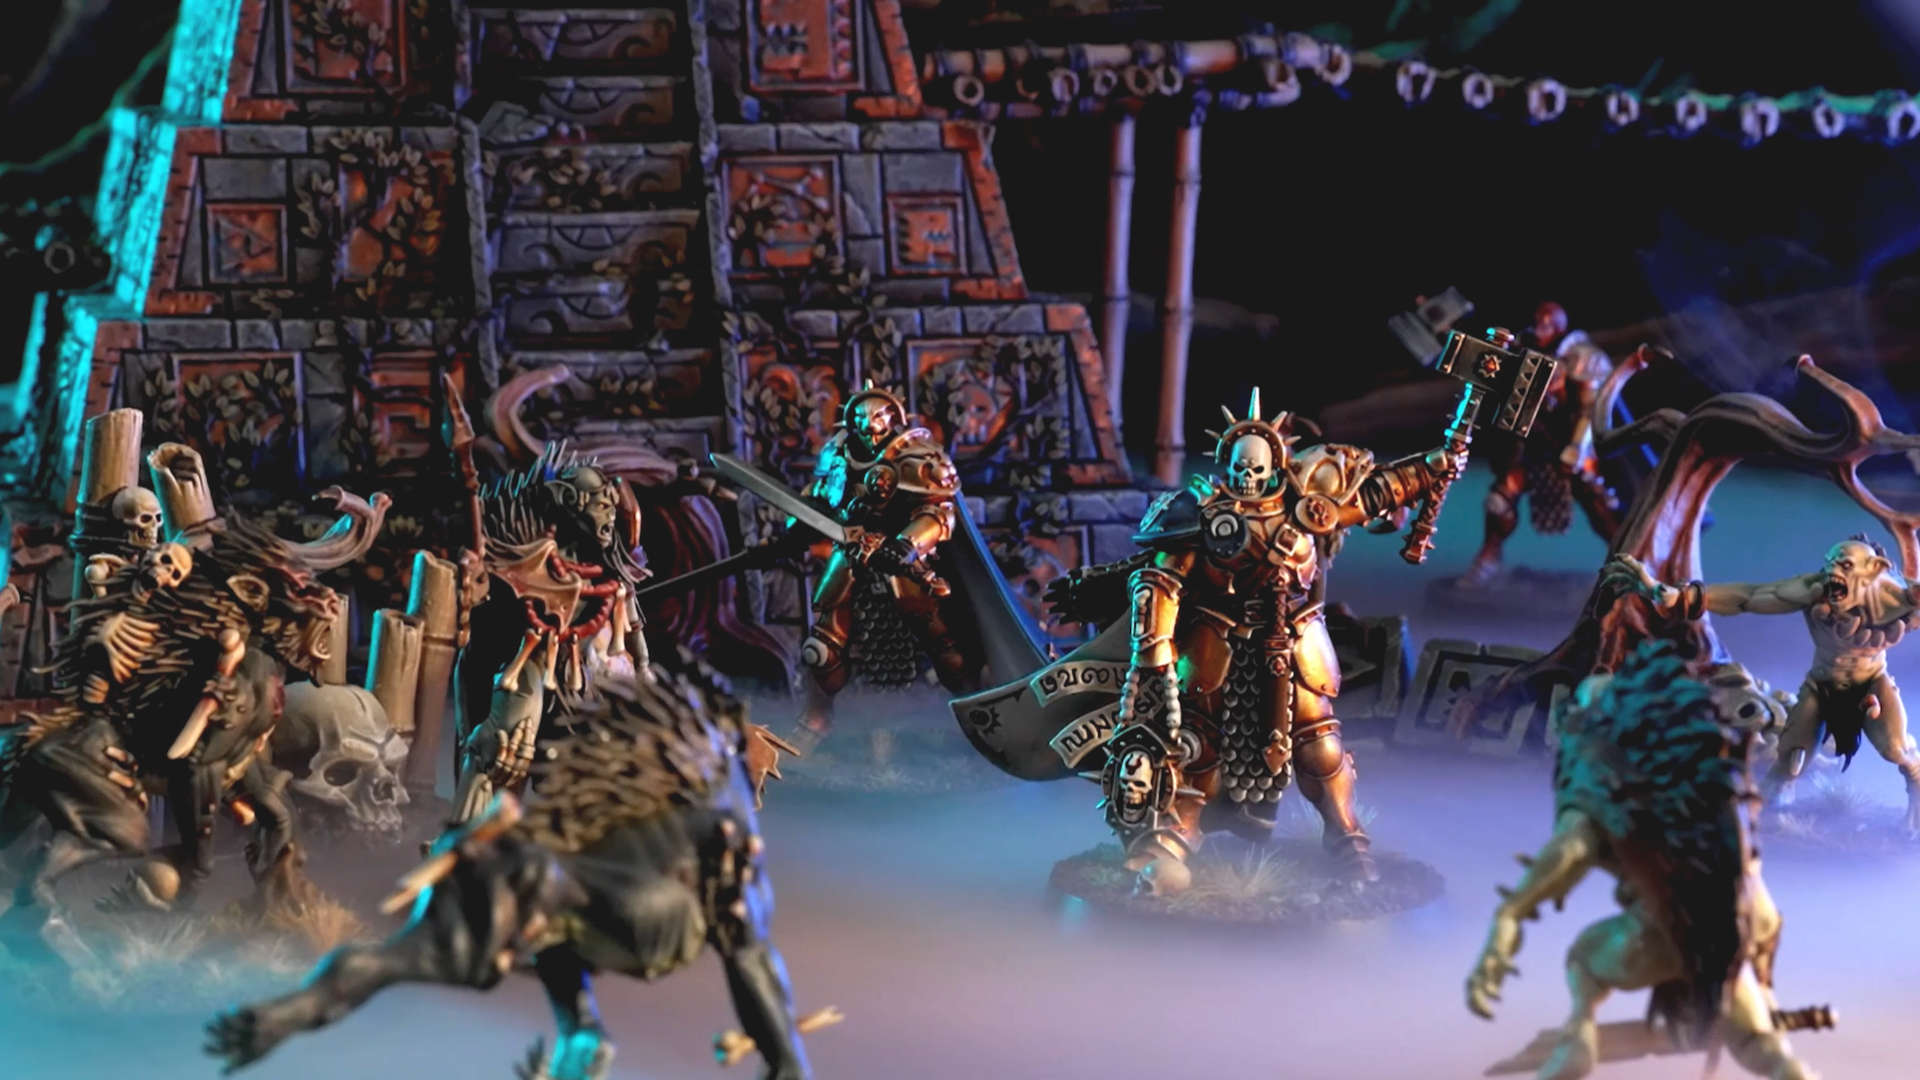 There's a whole pyramid in the next Warhammer Warcry box set